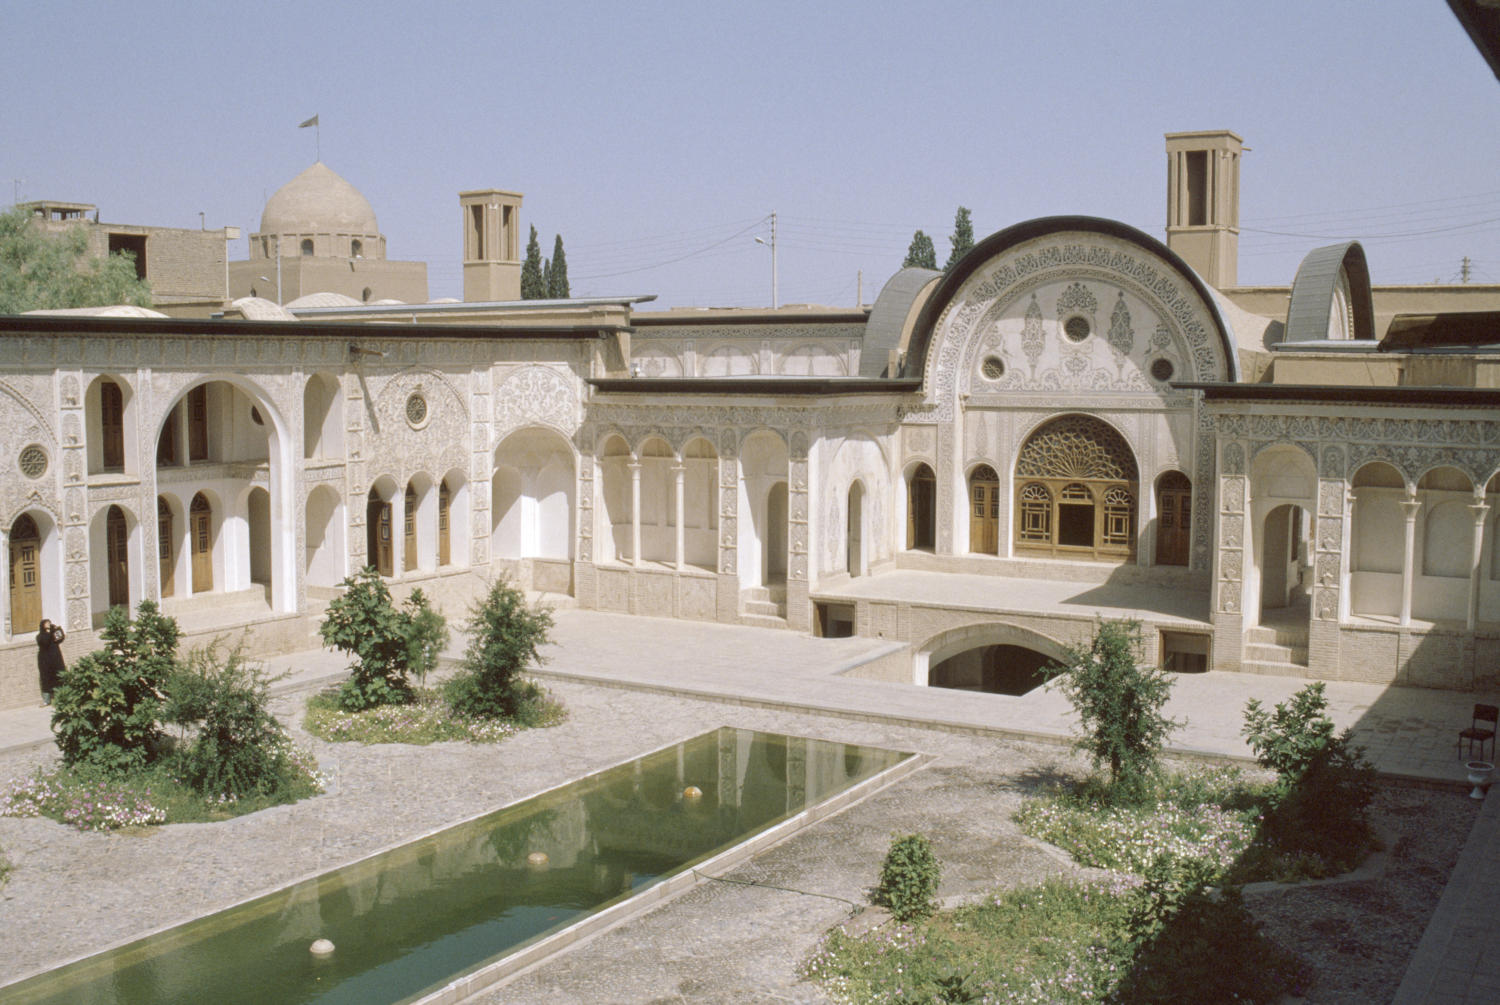 View of the courtyard after restoration.